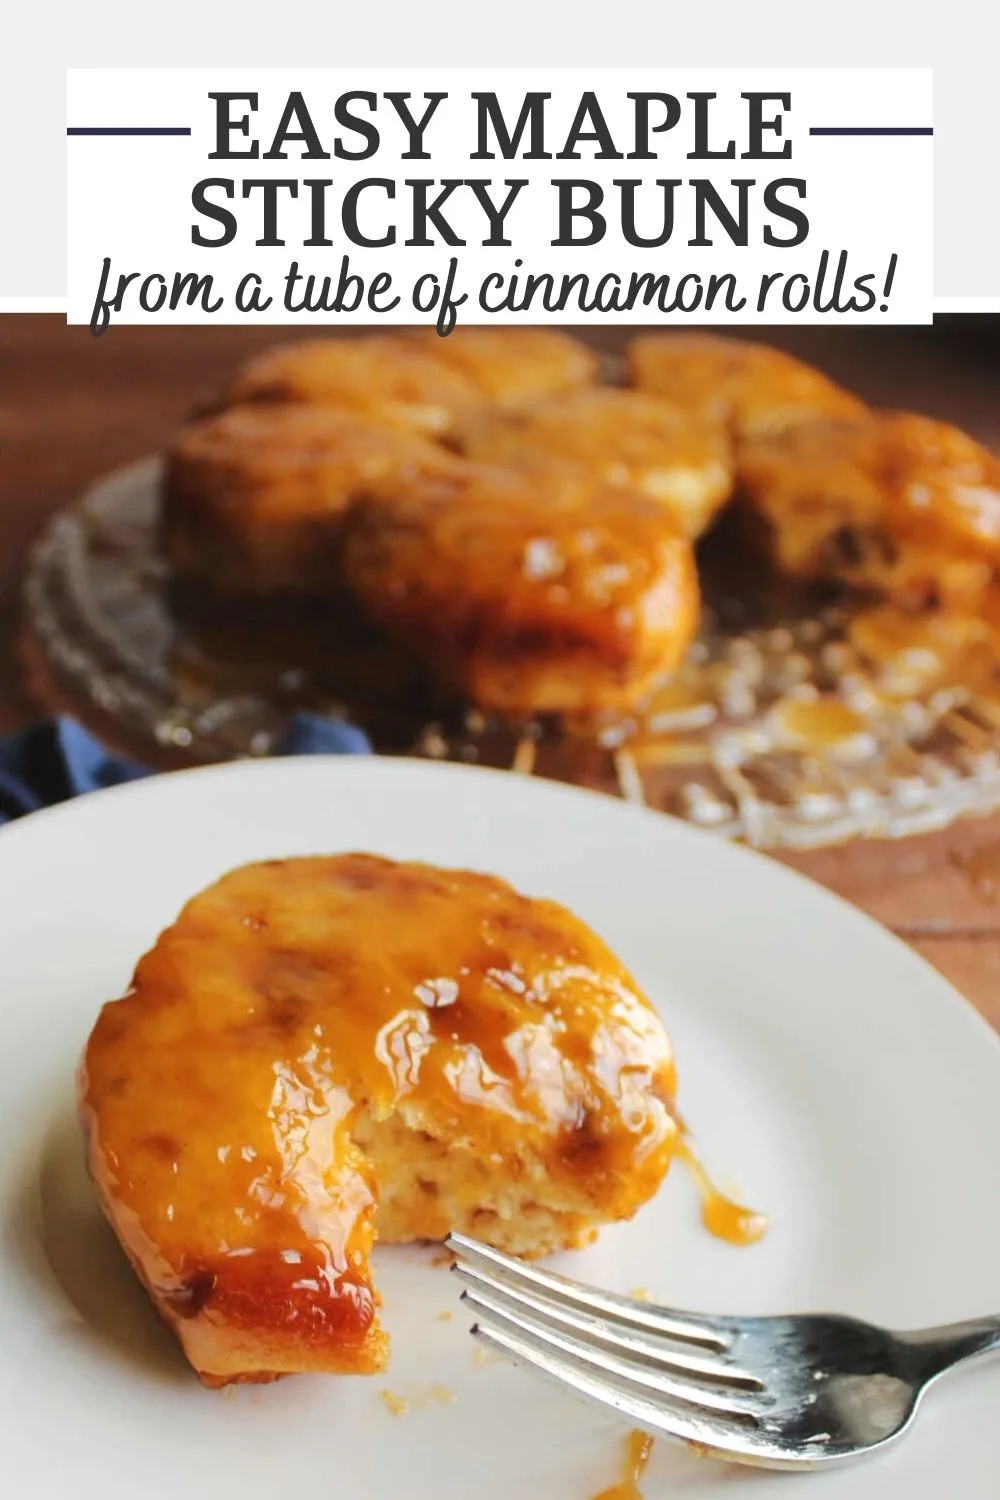 If you are looking for a quick and easy way to take a tube of cinnamon roll dough to the next level, you are in the right place! These gooey buns cook in a sauce made from butter, brown sugar and pure maple syrup to make an out of this world treat that is ready in no time at all.